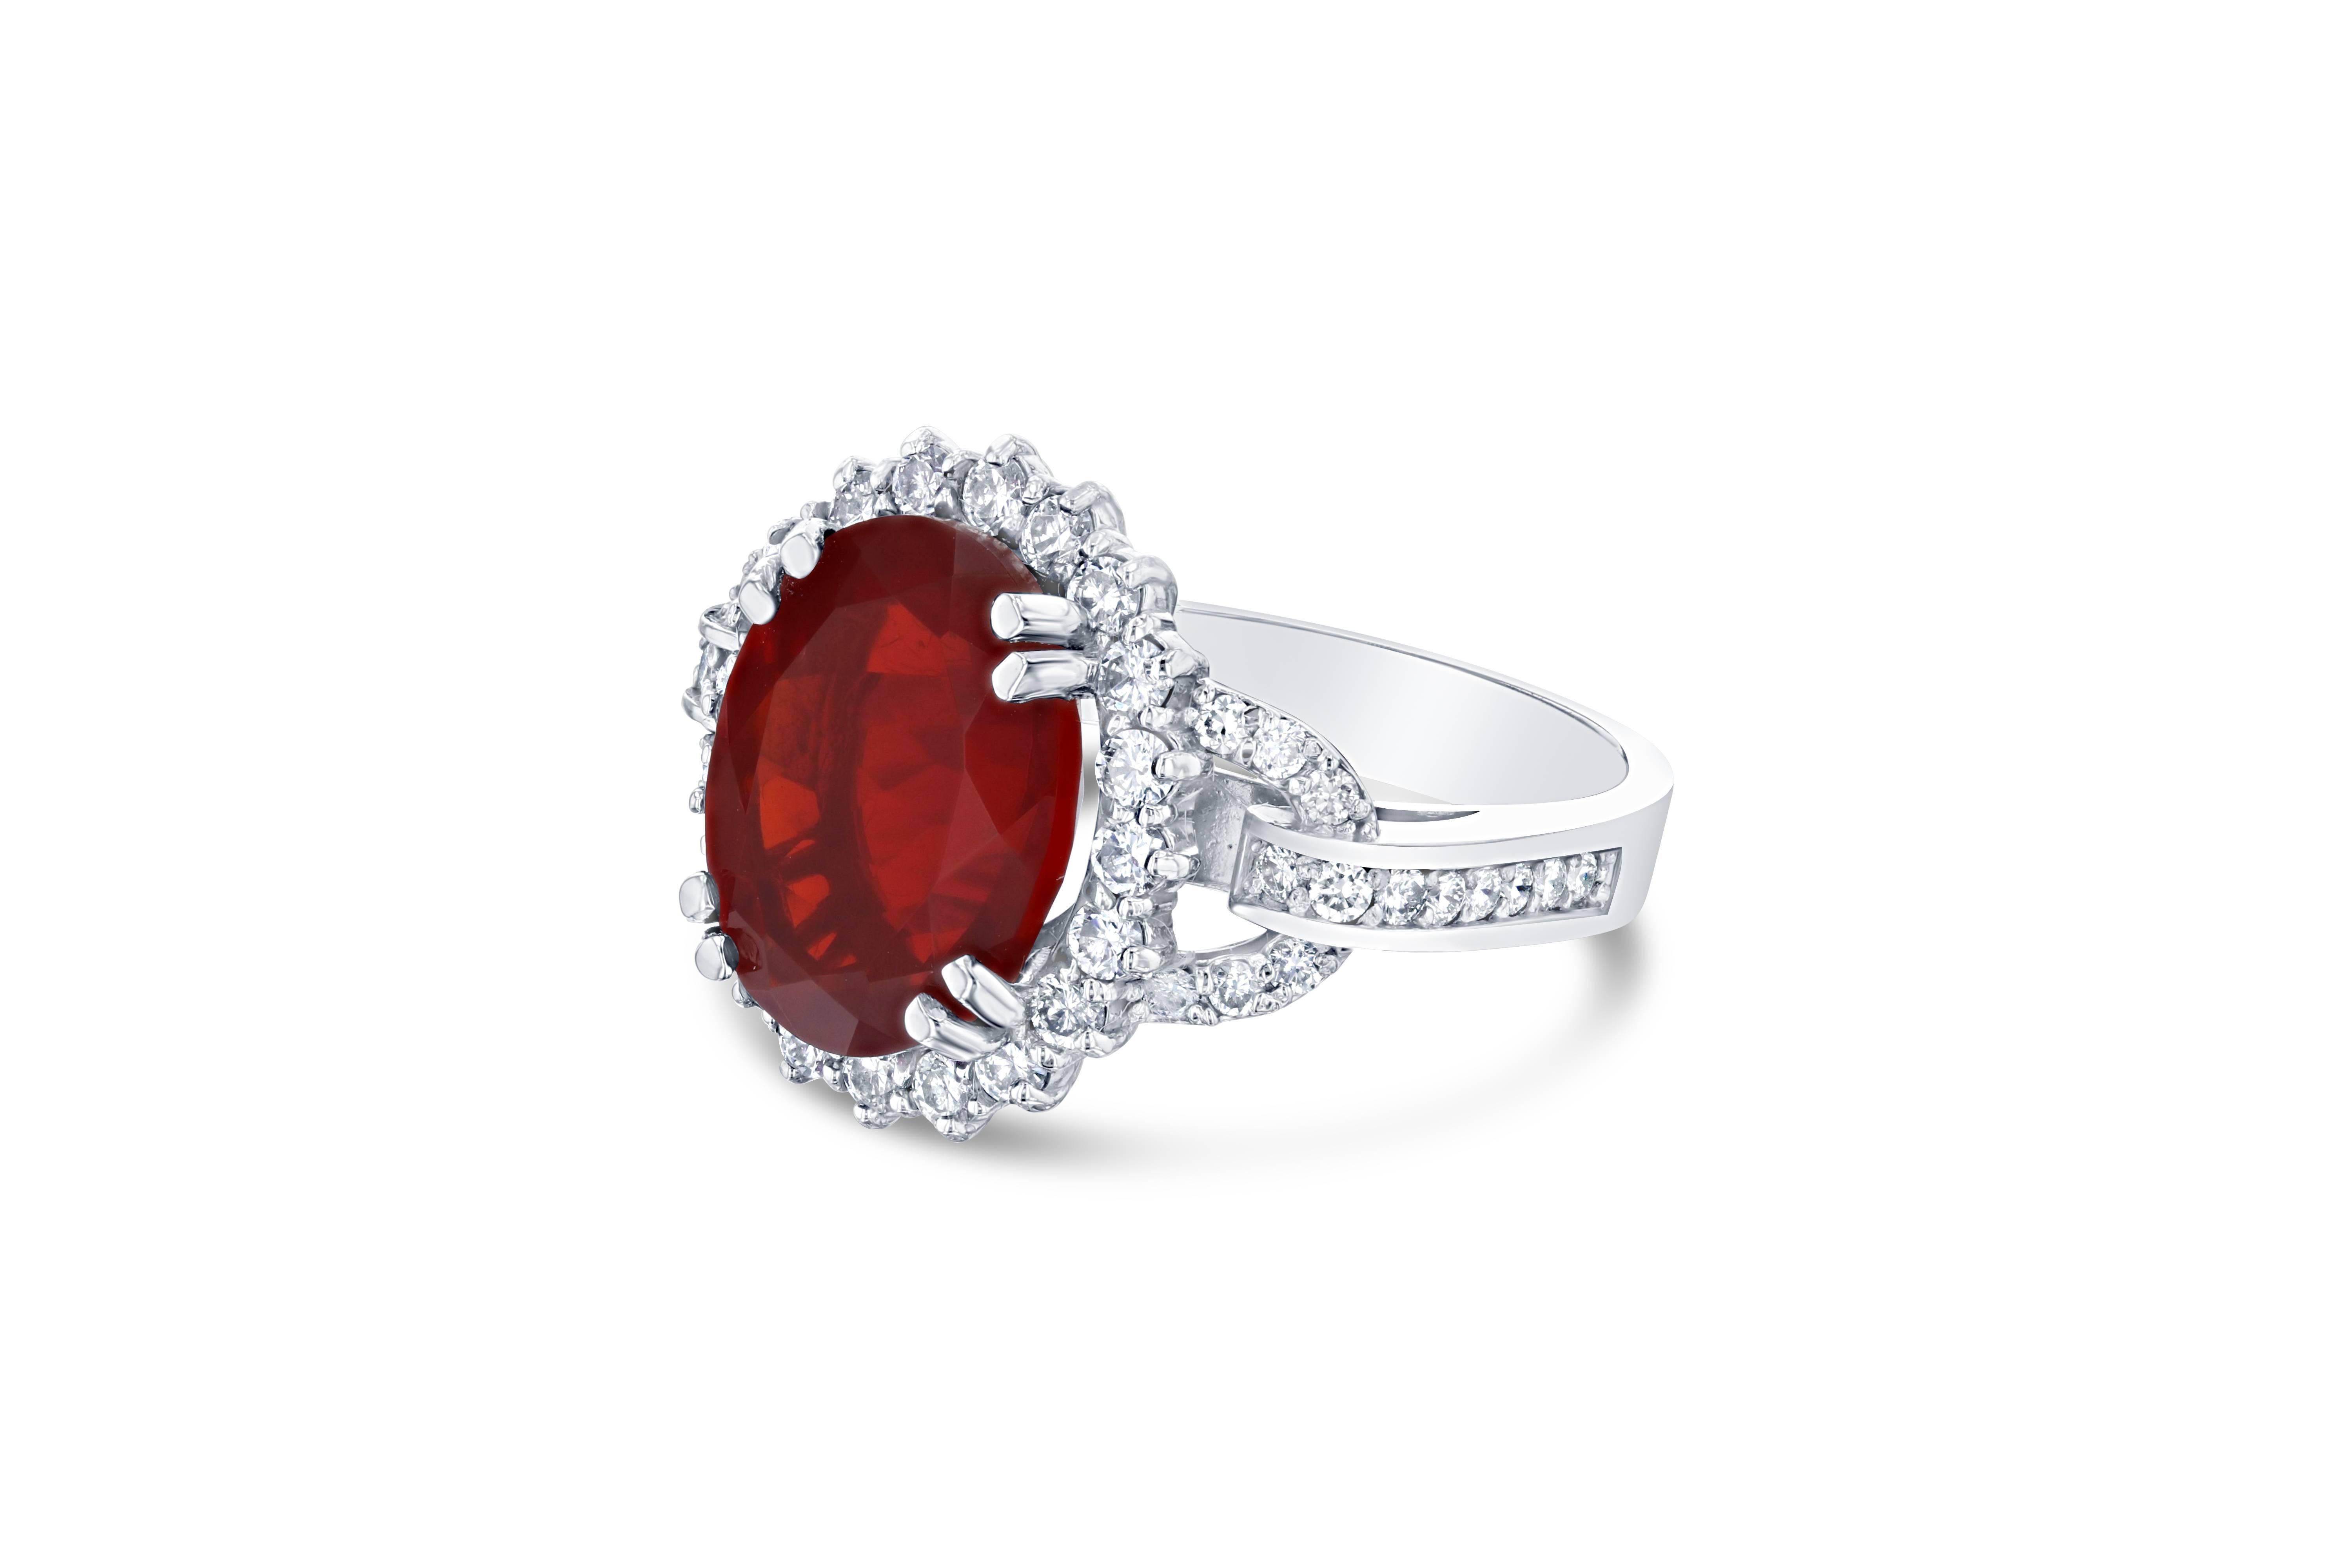 This ring has a 4.61 carat Fire Opal in the center of the ring and is surrounded by 48 Round Brilliant Cut Diamonds that weigh a total of 0.89 carat.  The Clarity is a VS and the Color is H.  The ring is casted in 14K White Gold weighs approximately